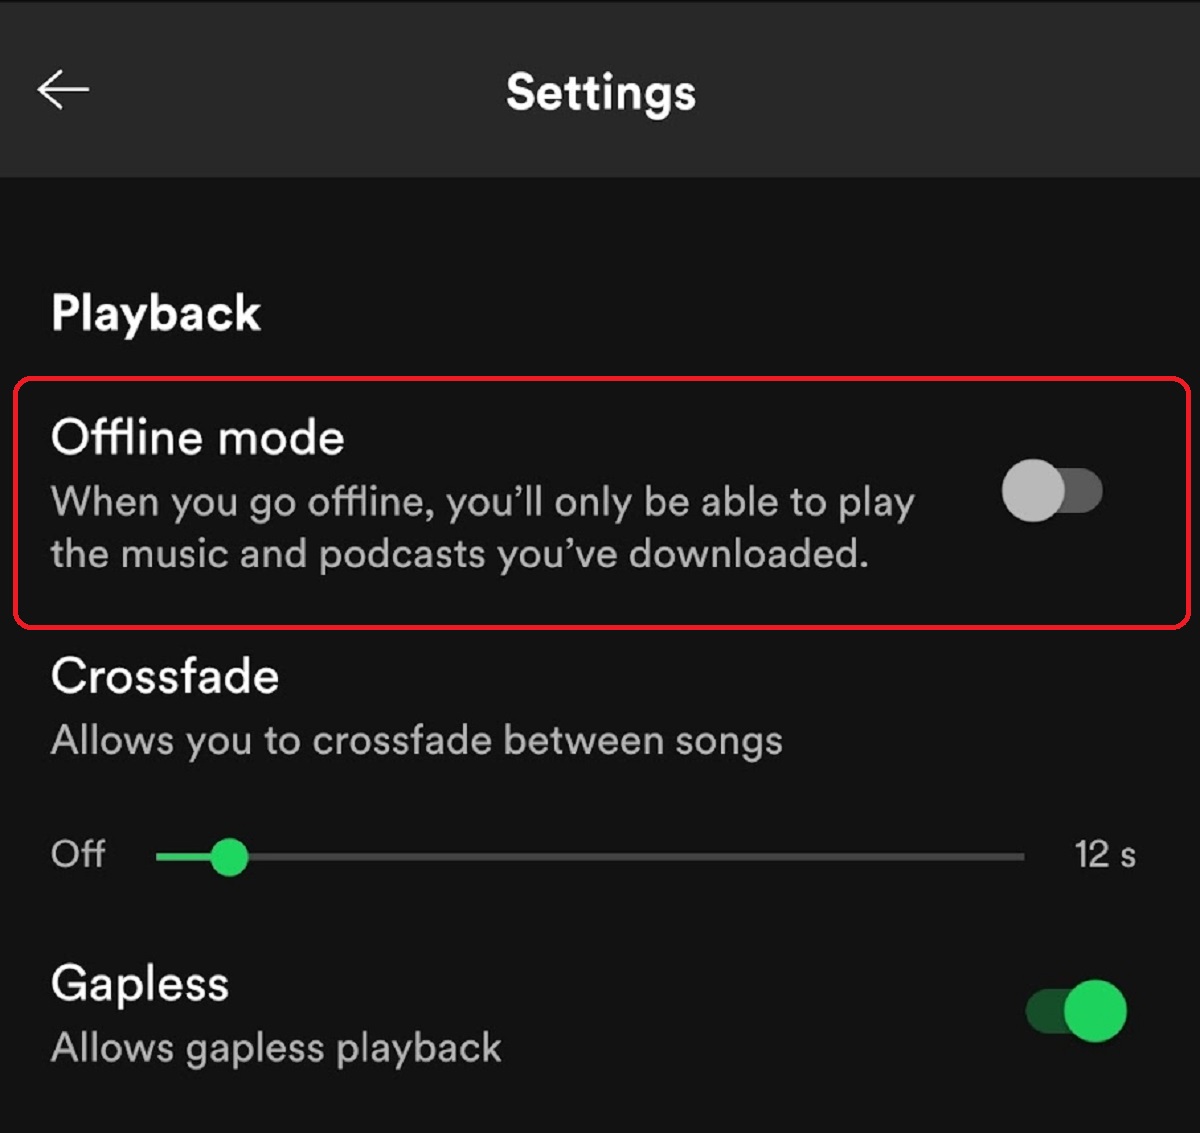 Alt=Spotify Playback settings, the Offline mode feature is highlighted in red